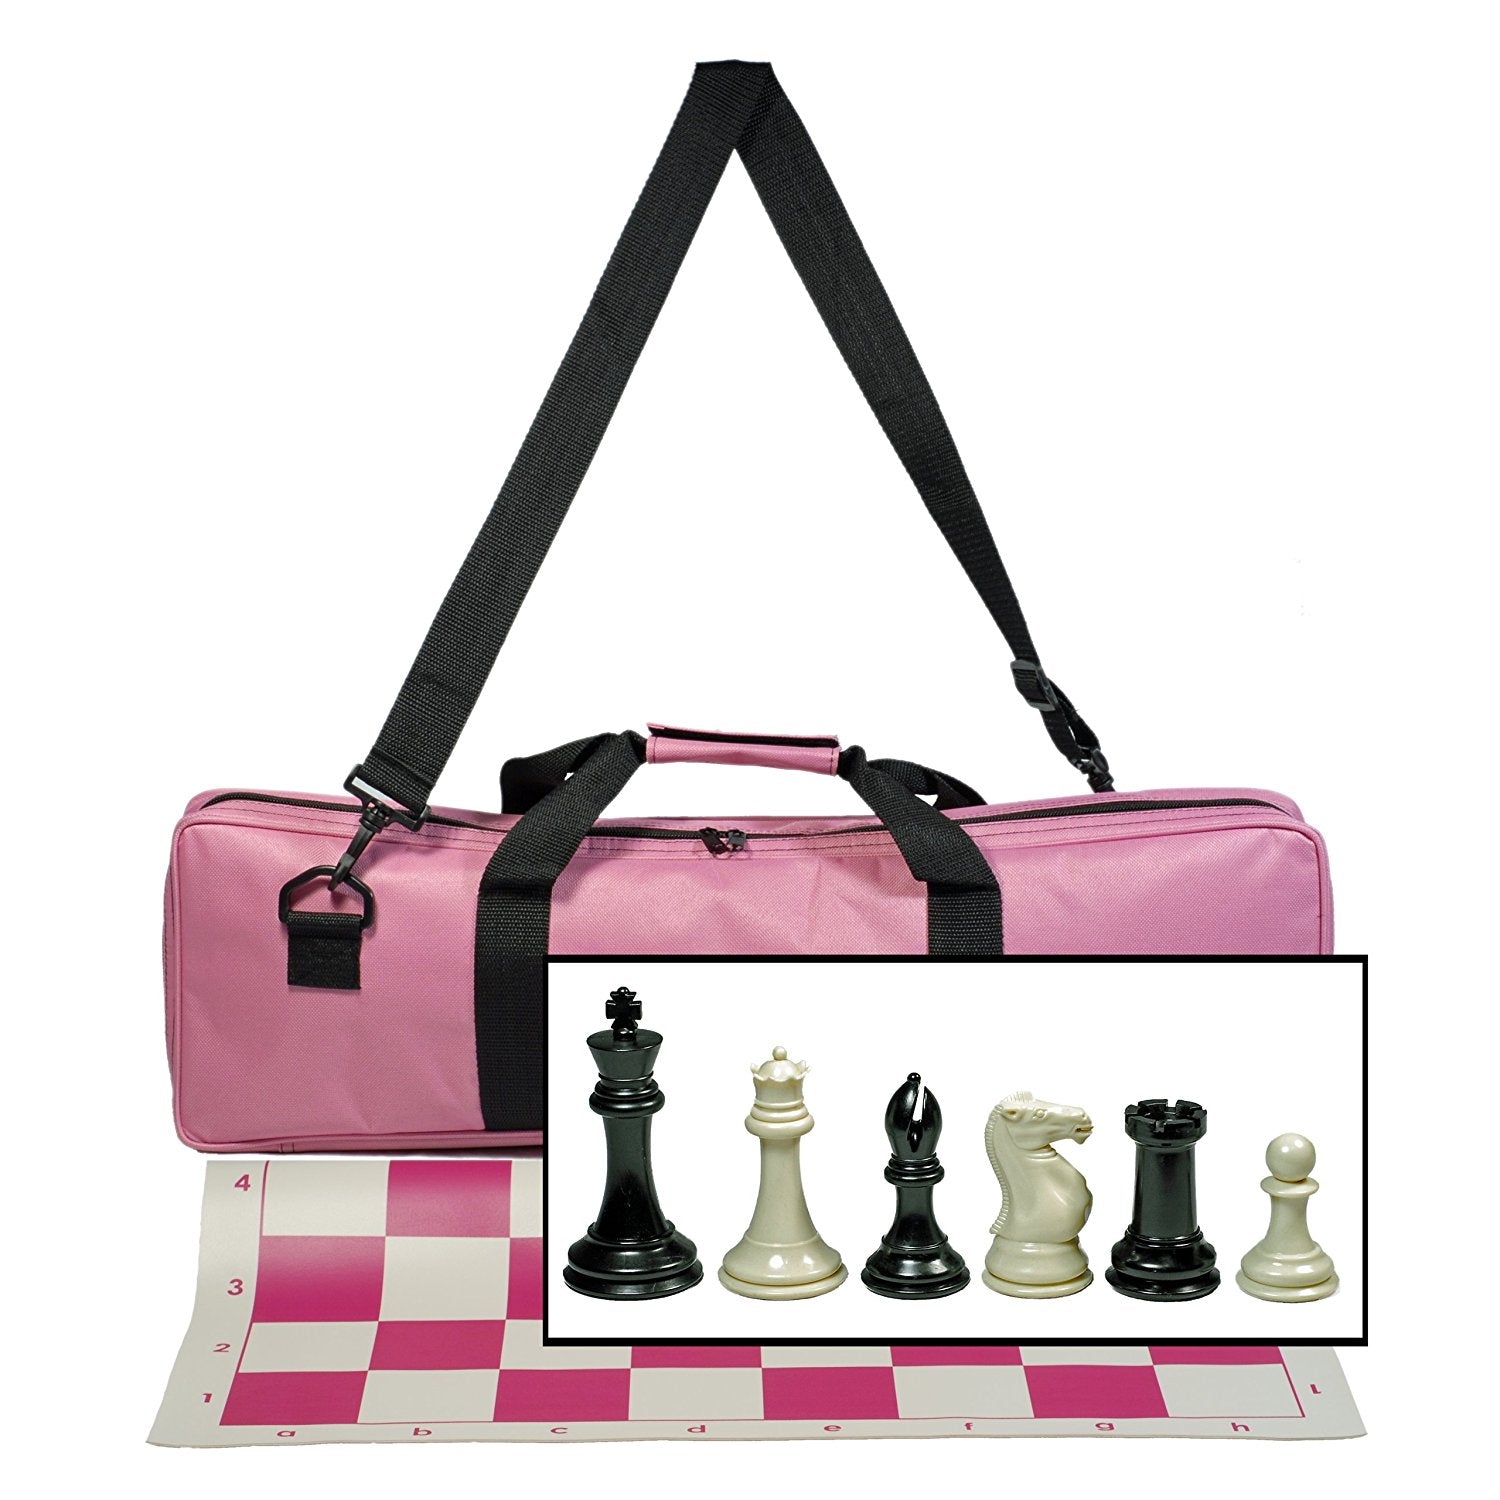 Chess Game S00 - Sport and Lifestyle